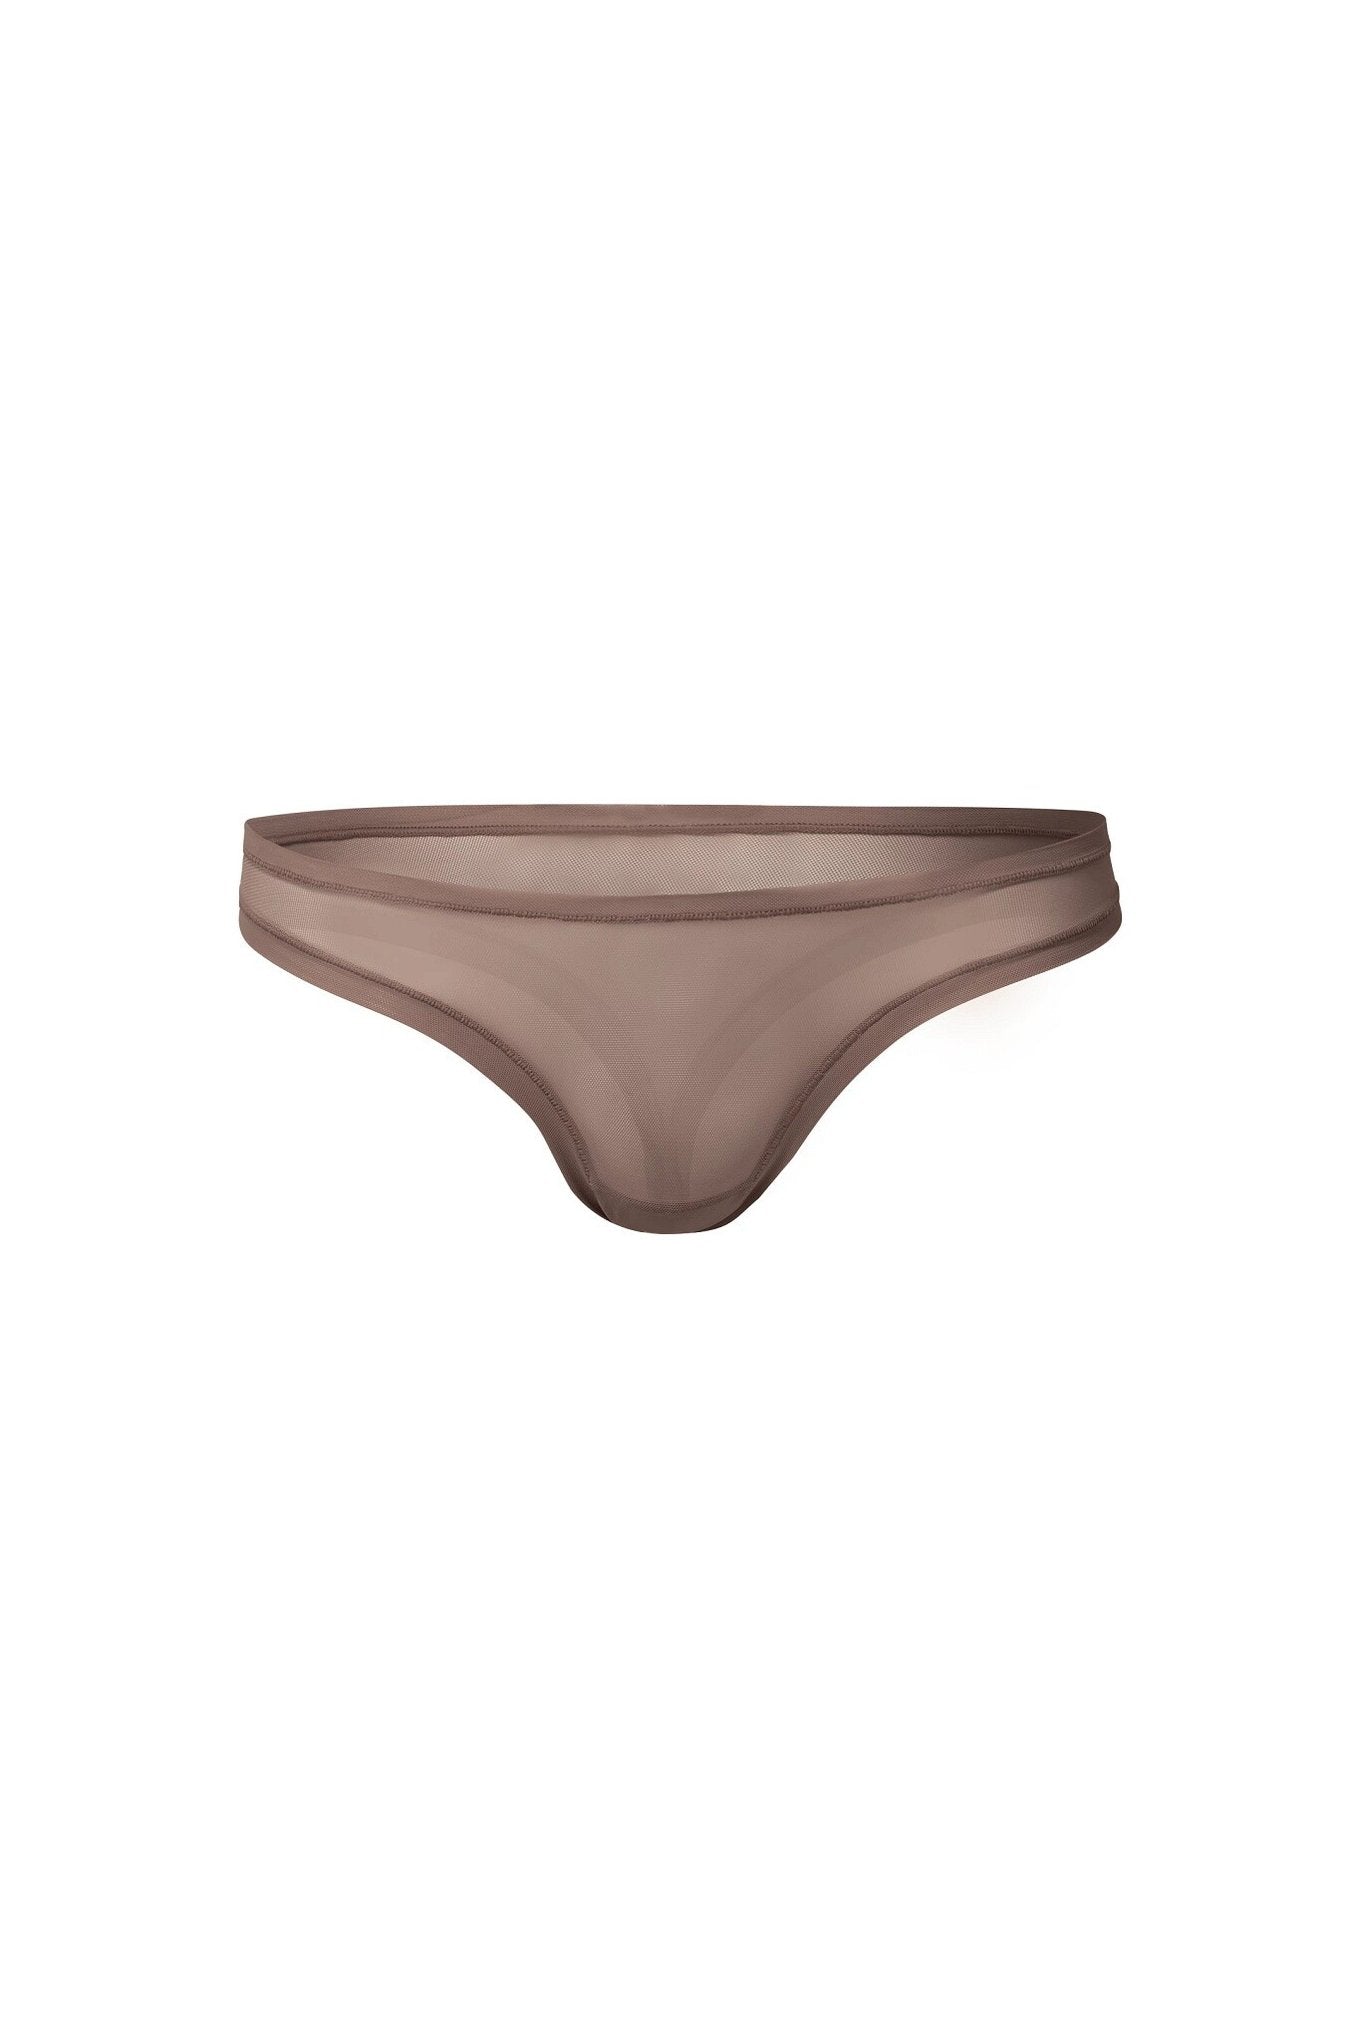 nueskin Bonnie Mesh Low-Rise Thong in color Deep Taupe and shape thong